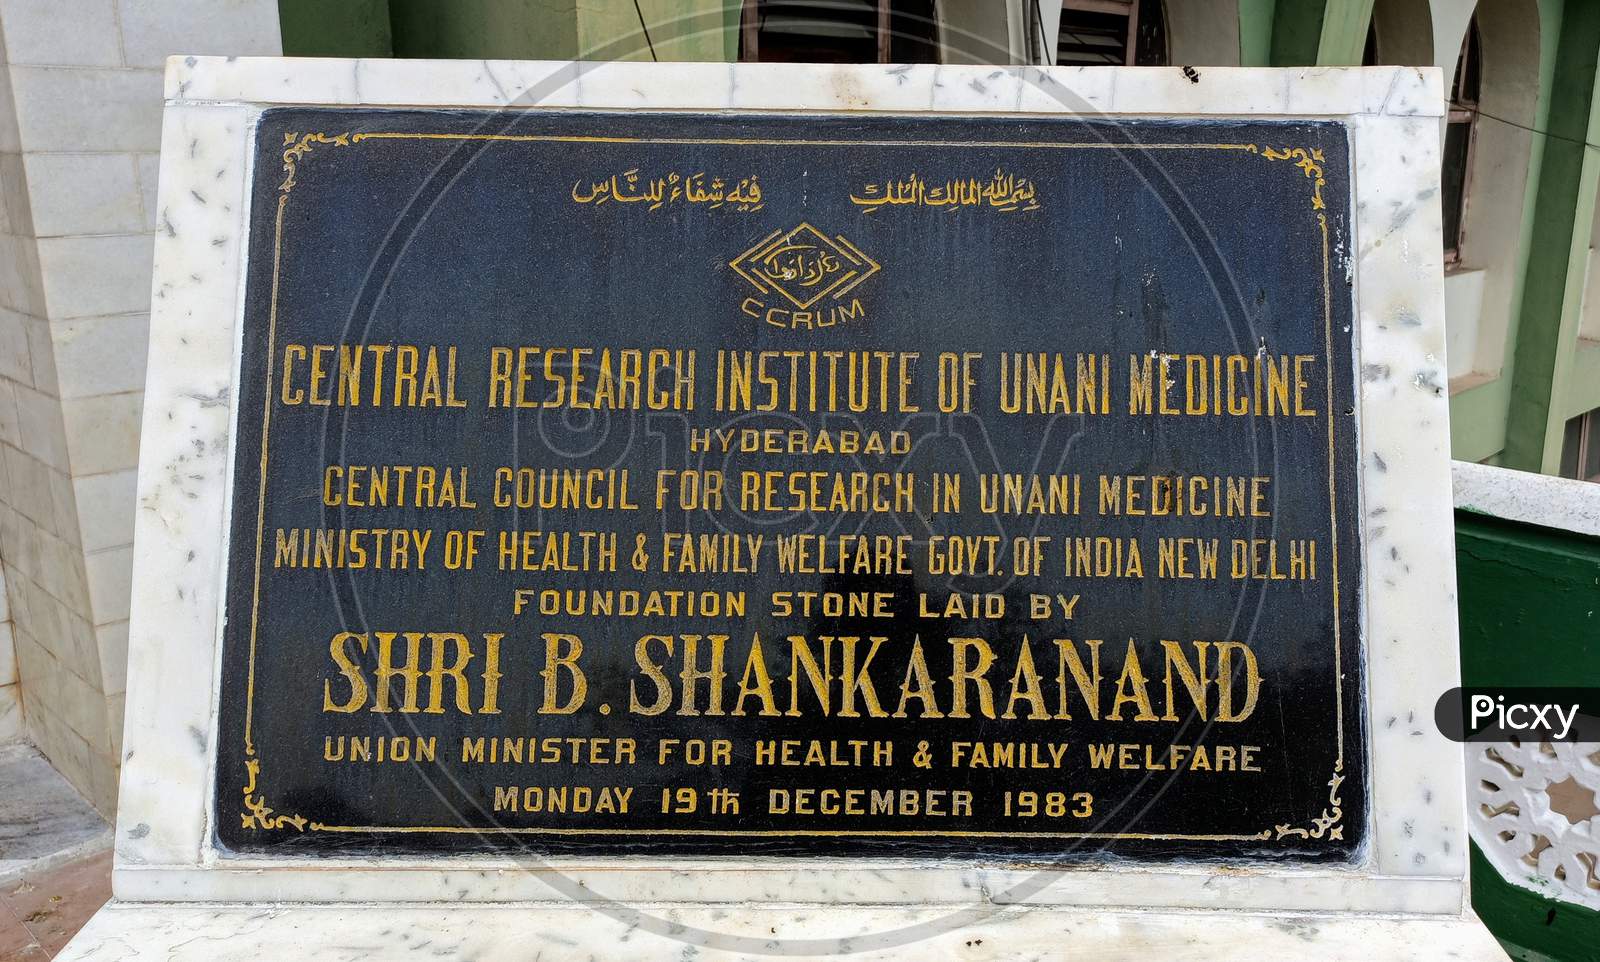 Central Research Institute Of Unani Medicine Hyderabad Foundation Stone Laid by by Shri B Shankaranand Union Minister For Health & Family Welfare Government Of India Monday 19th December 1983